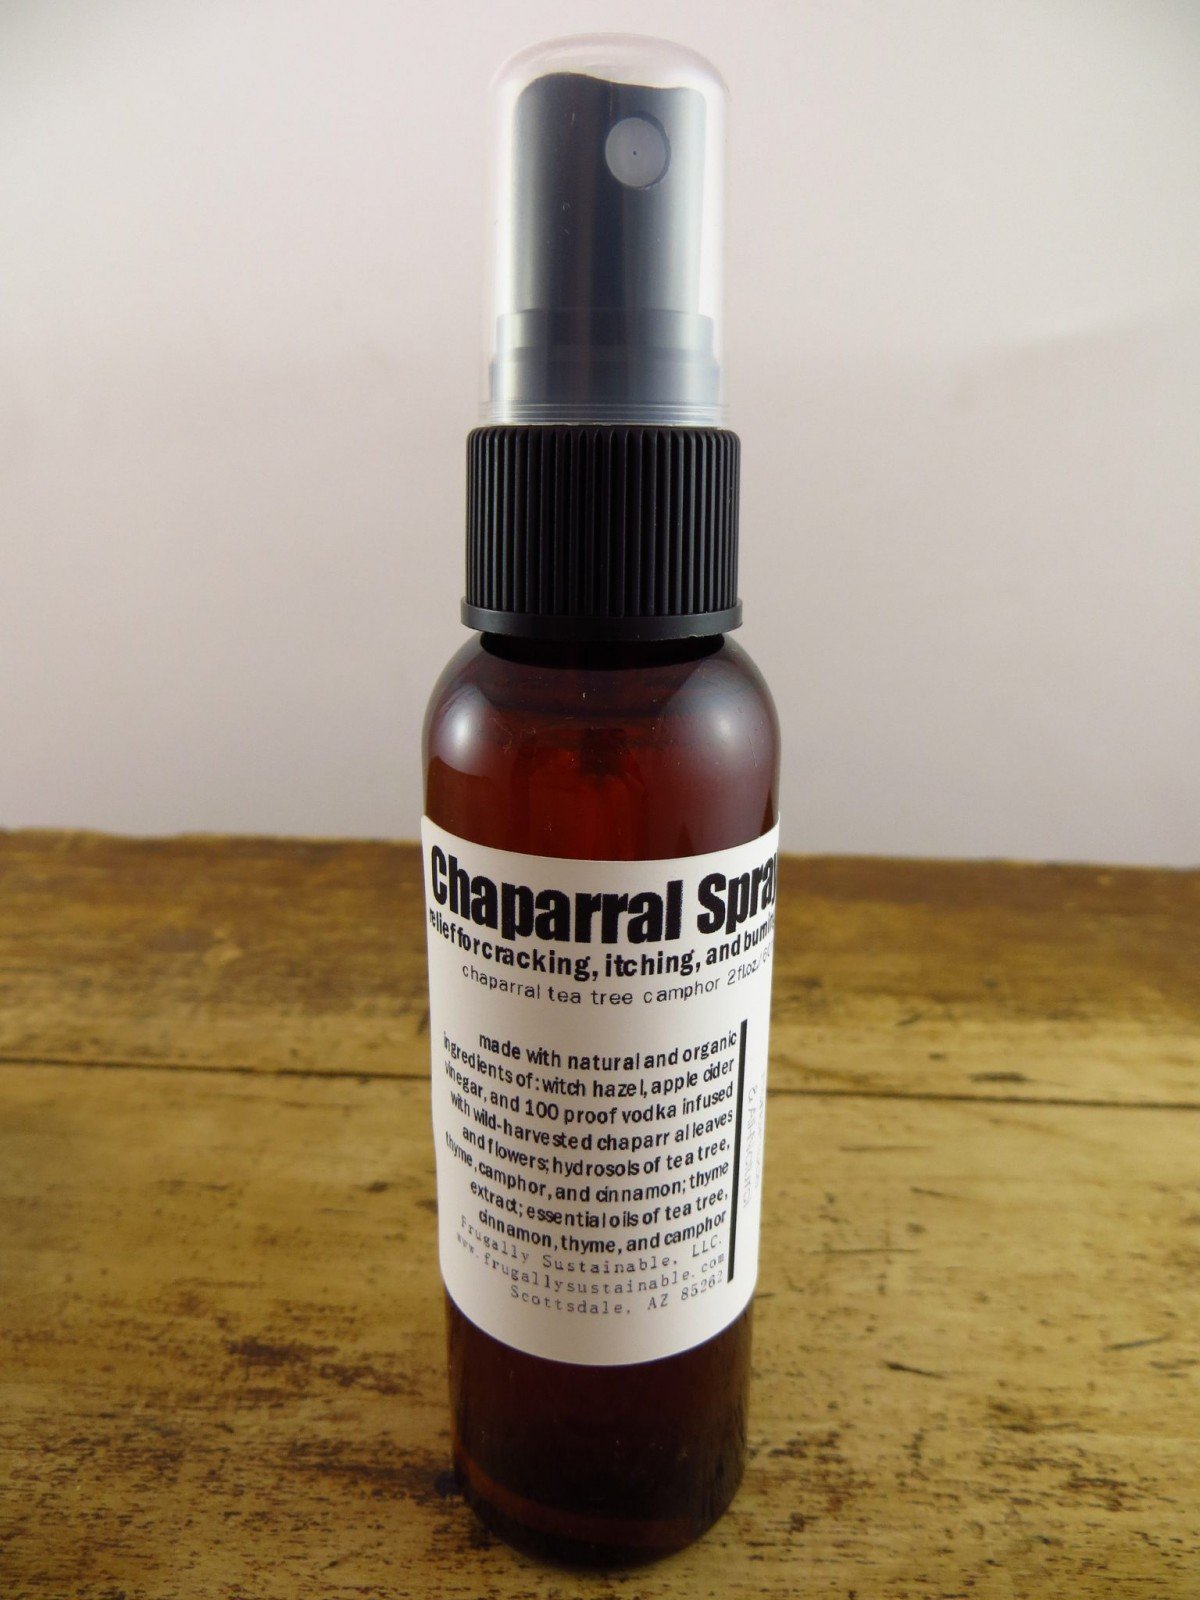 Chaparral Spray by Frugally Sustainable